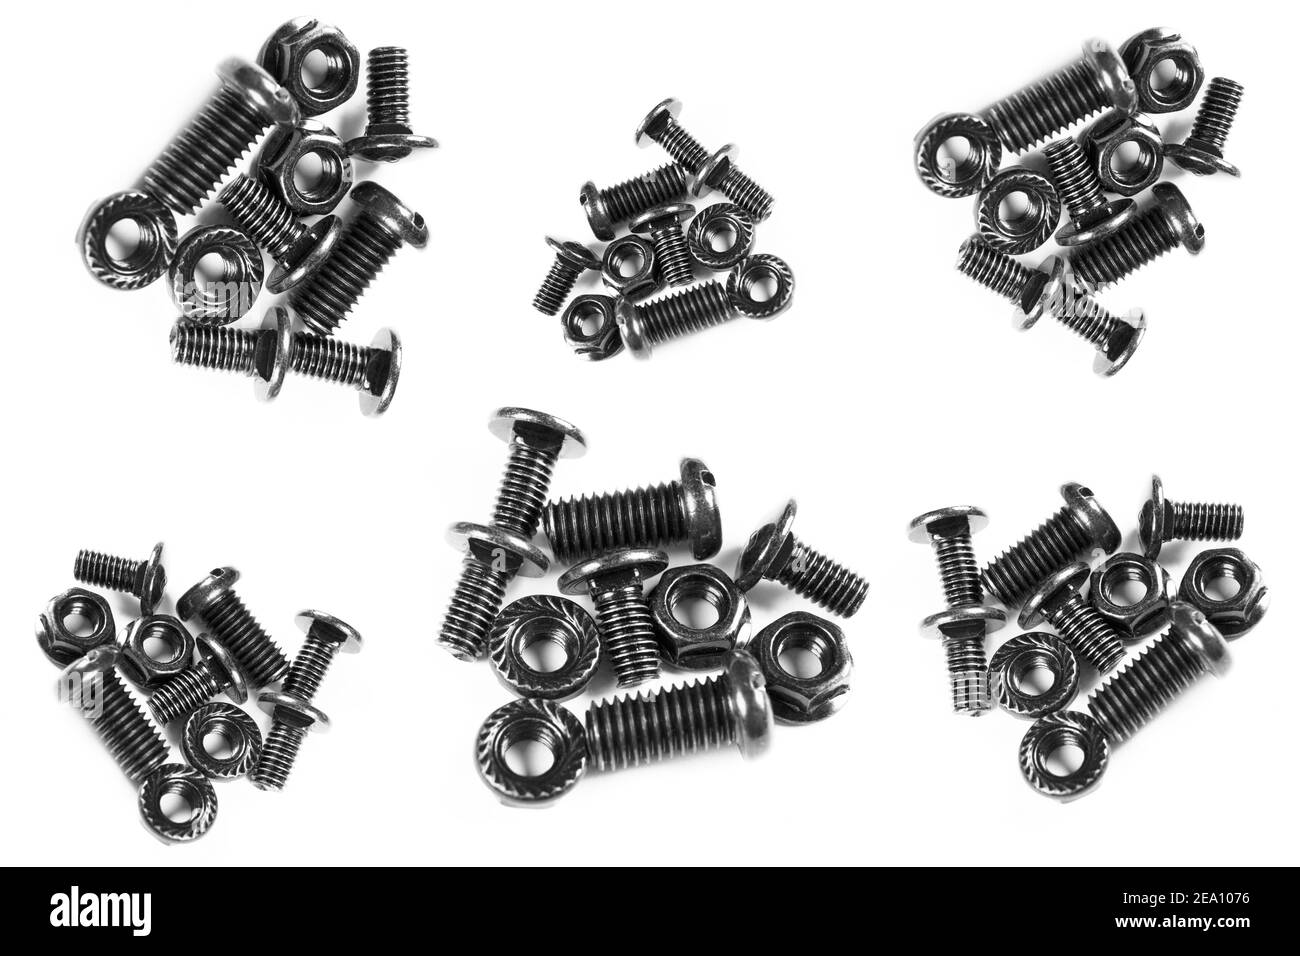 Black metal bolts and nuts  in a row. Black screw bolts and nuts isolated. Steel bolts and nuts pattern. Stock Photo